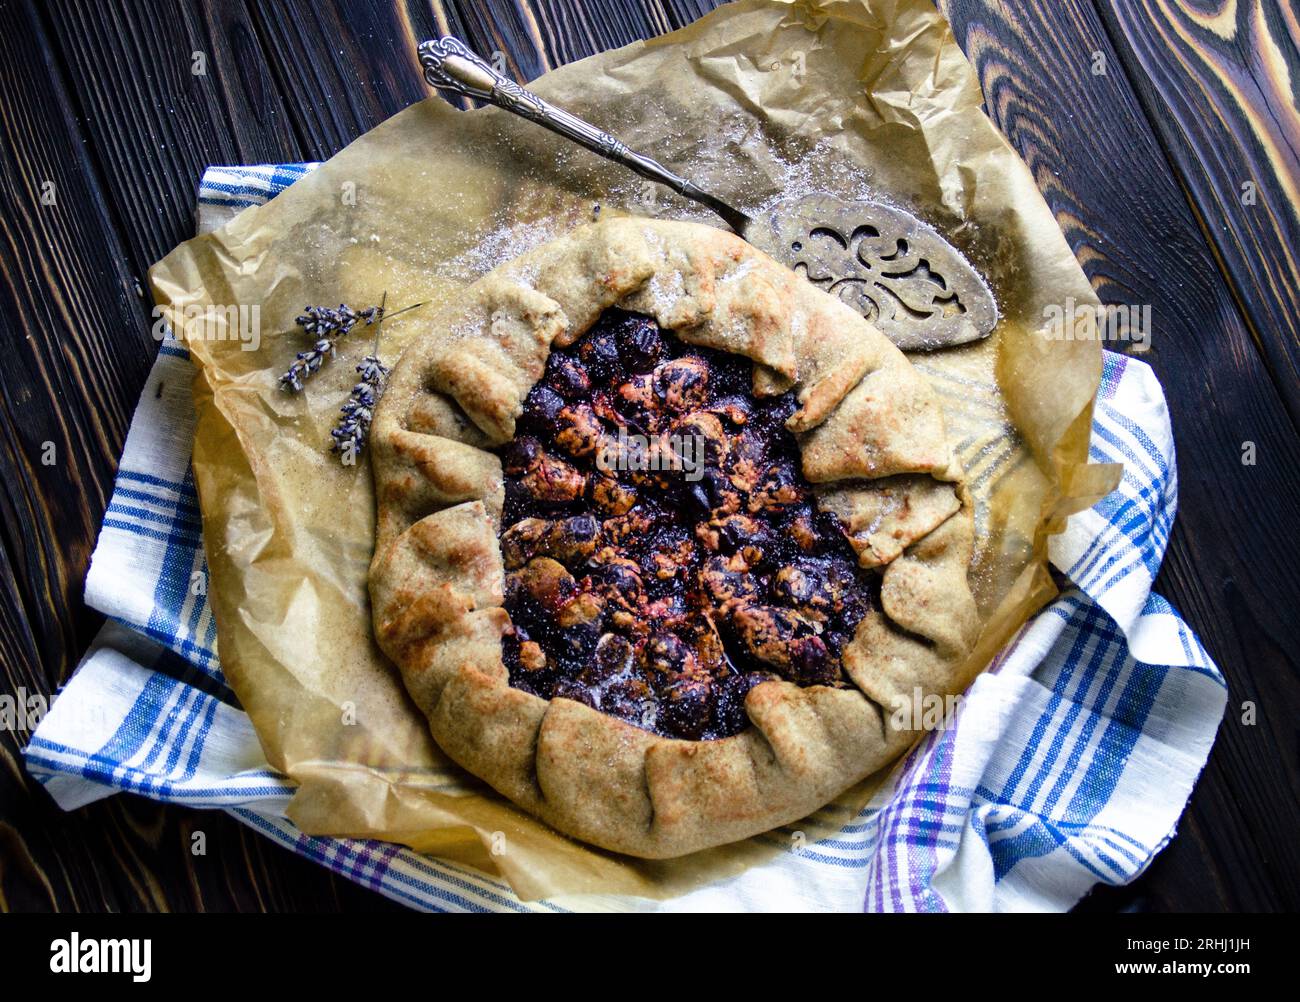 Food photography of dessert course with delicious plums, pie crust in vintage style Stock Photo